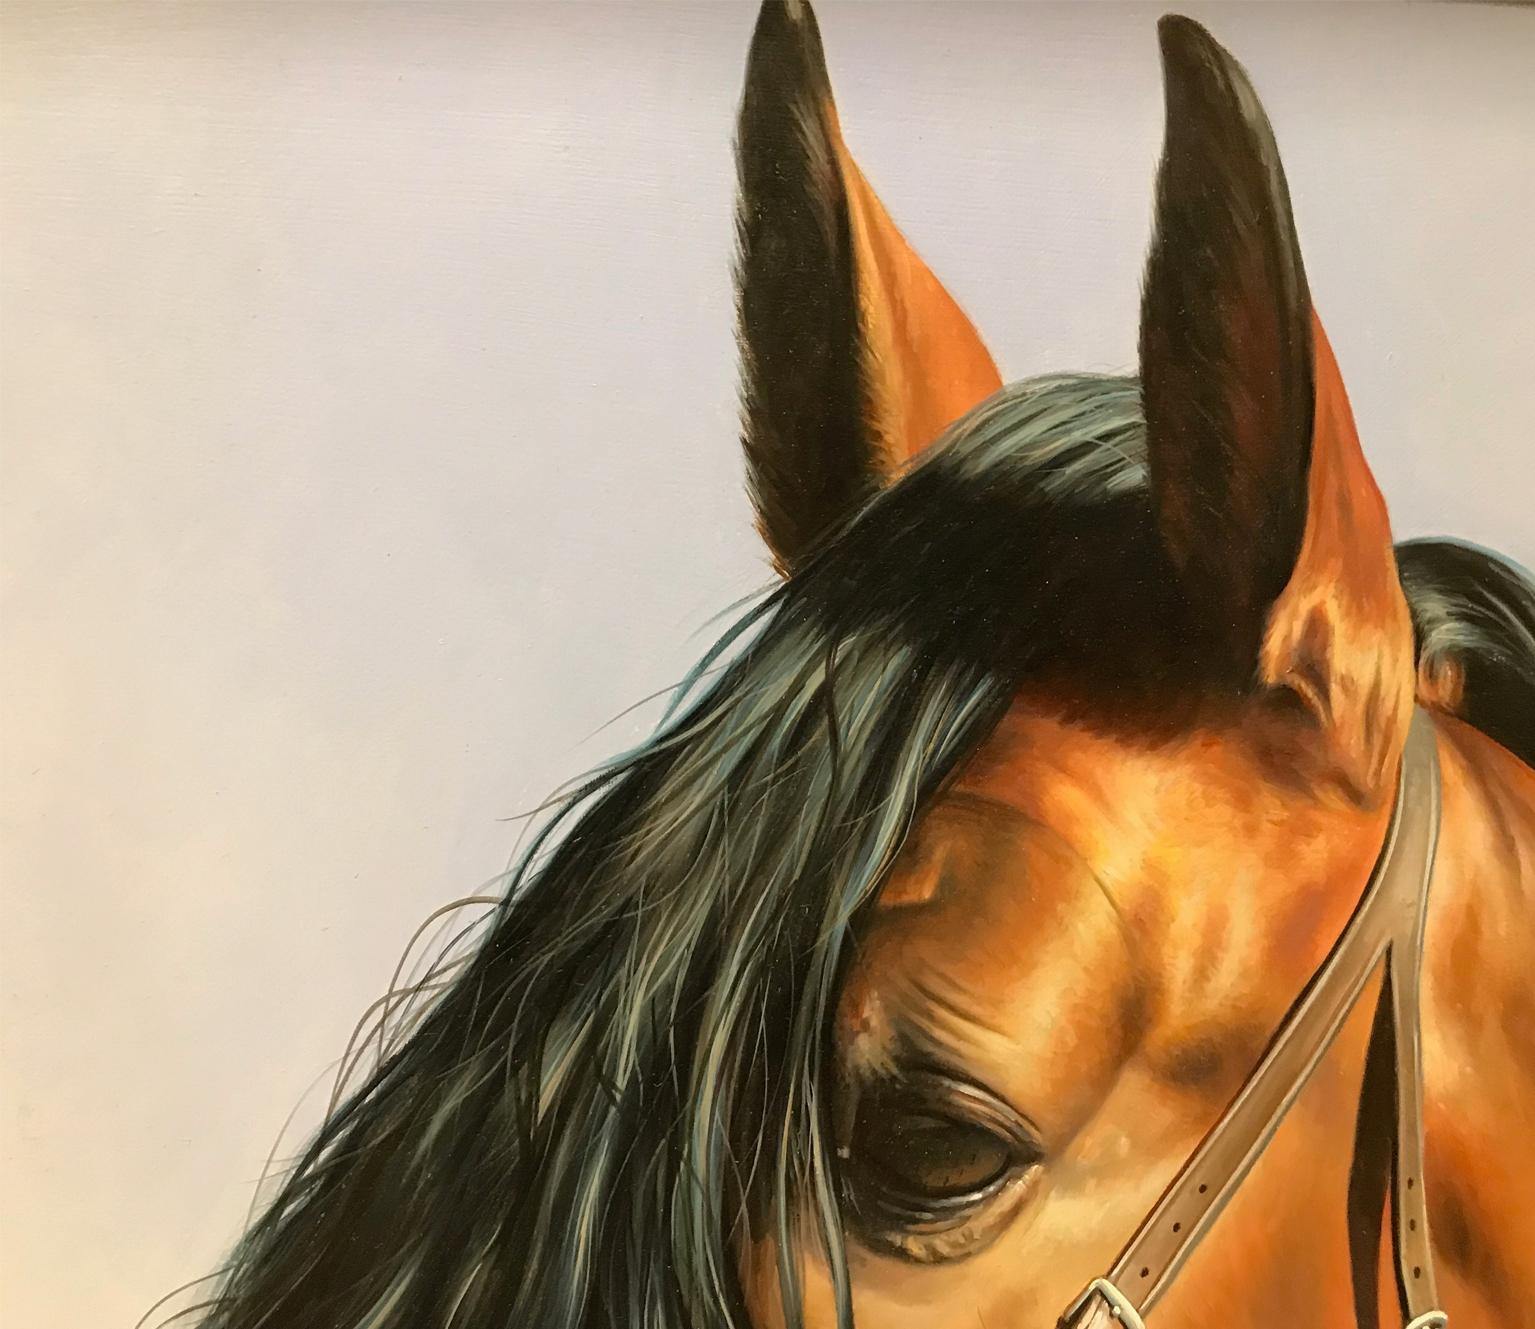 REALISM - HORSE - Painting by Manolo Higueras